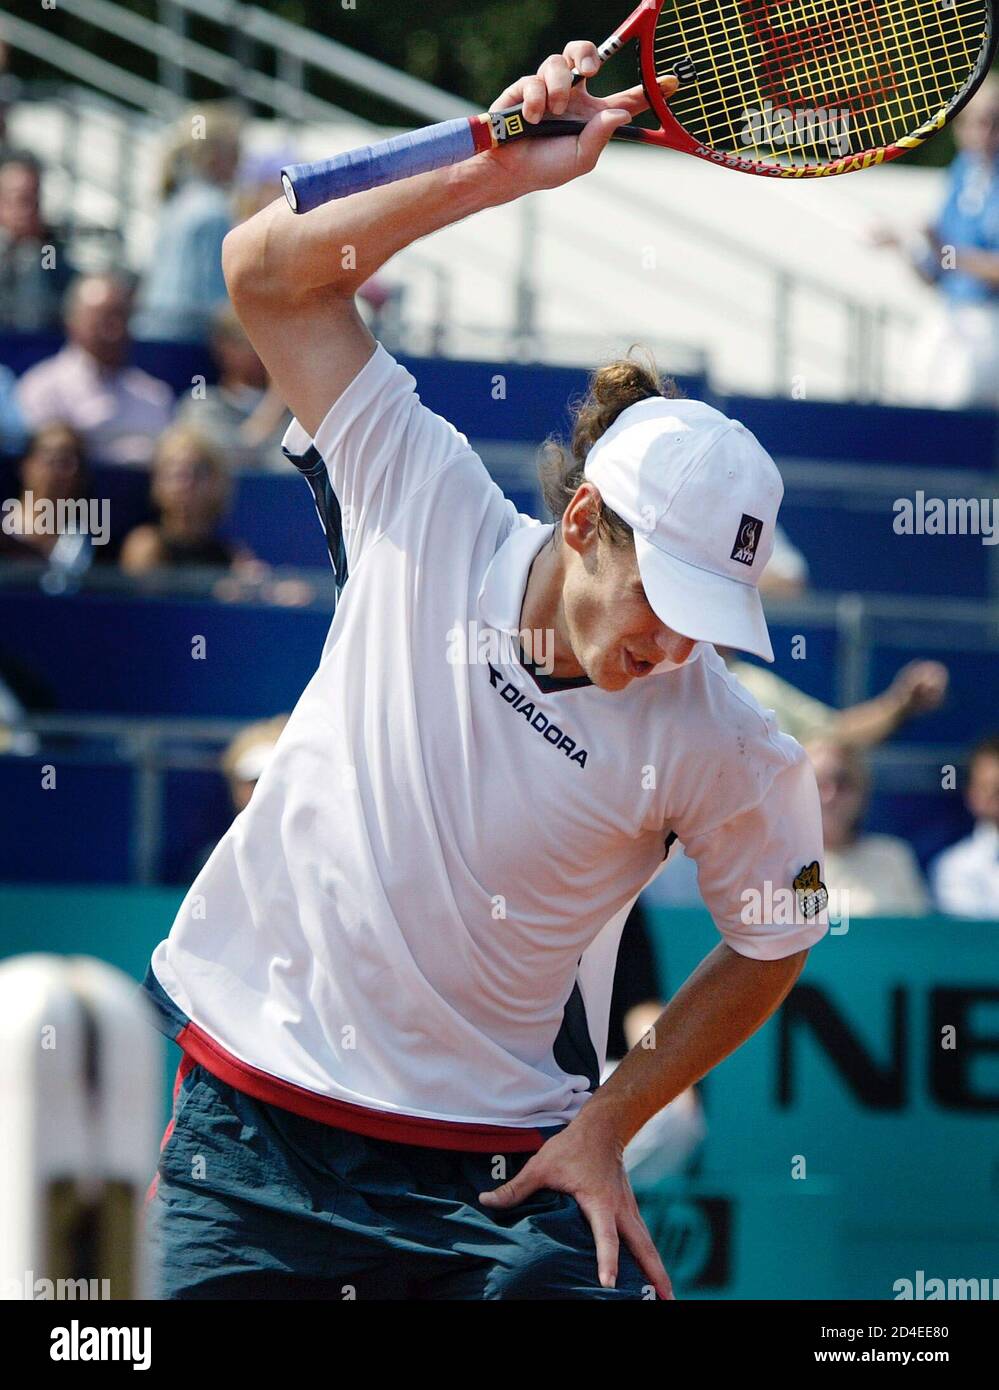 Gaston Gaudio of Argentina throws his racket on the court during his  semi-final match against Albert Costa of Spain at the Energis tennis open  in Amersfoort, the Netherlands on July 20,2002. REUTERS/Michael